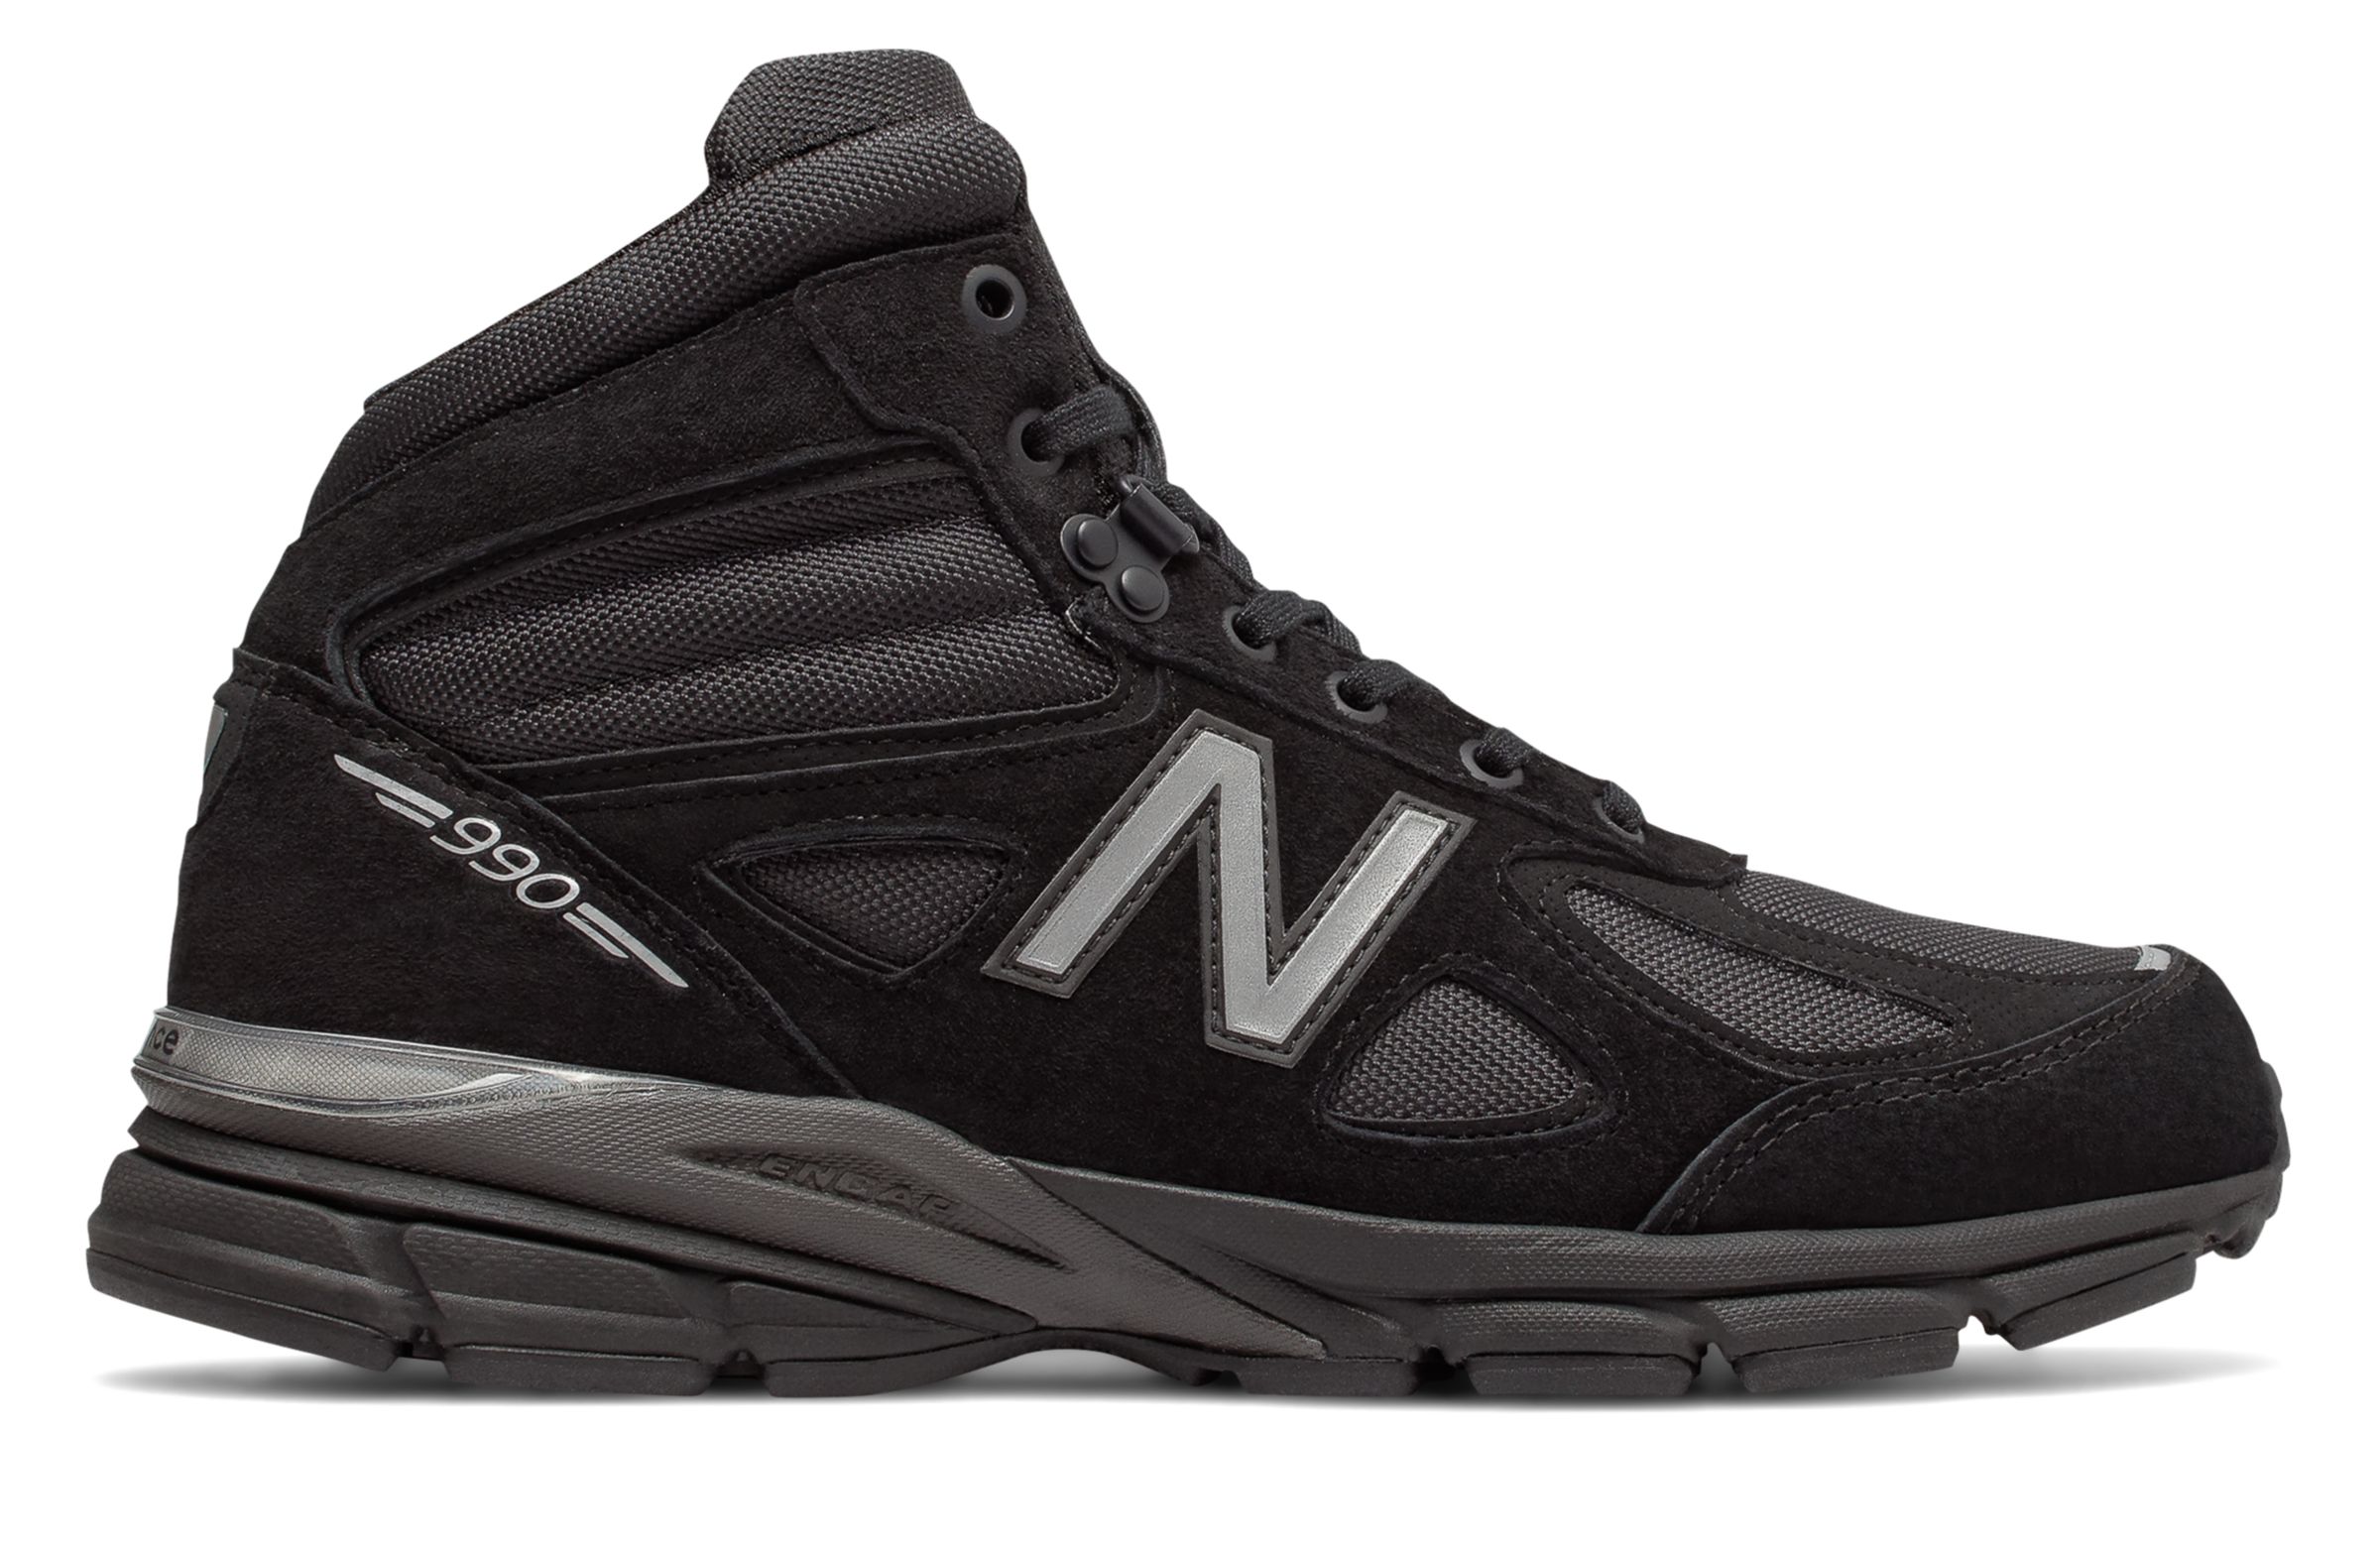 UPC 191264421950 product image for New Balance Men's 990v4 Mid Made in US Shoes Black with Grey | upcitemdb.com